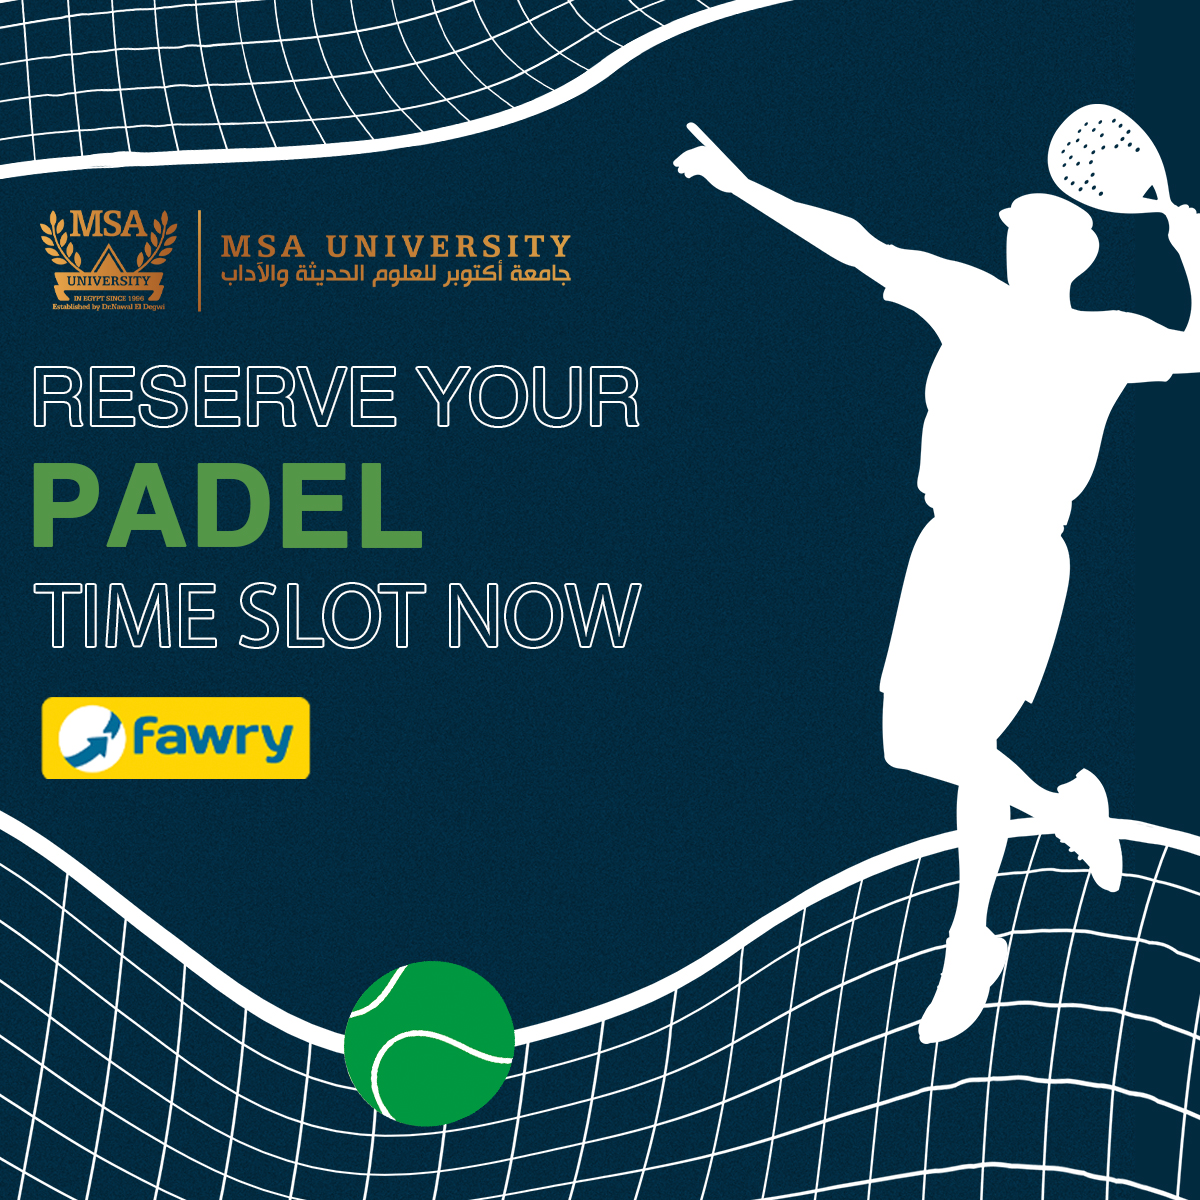 Reserve your Padel time slot now!